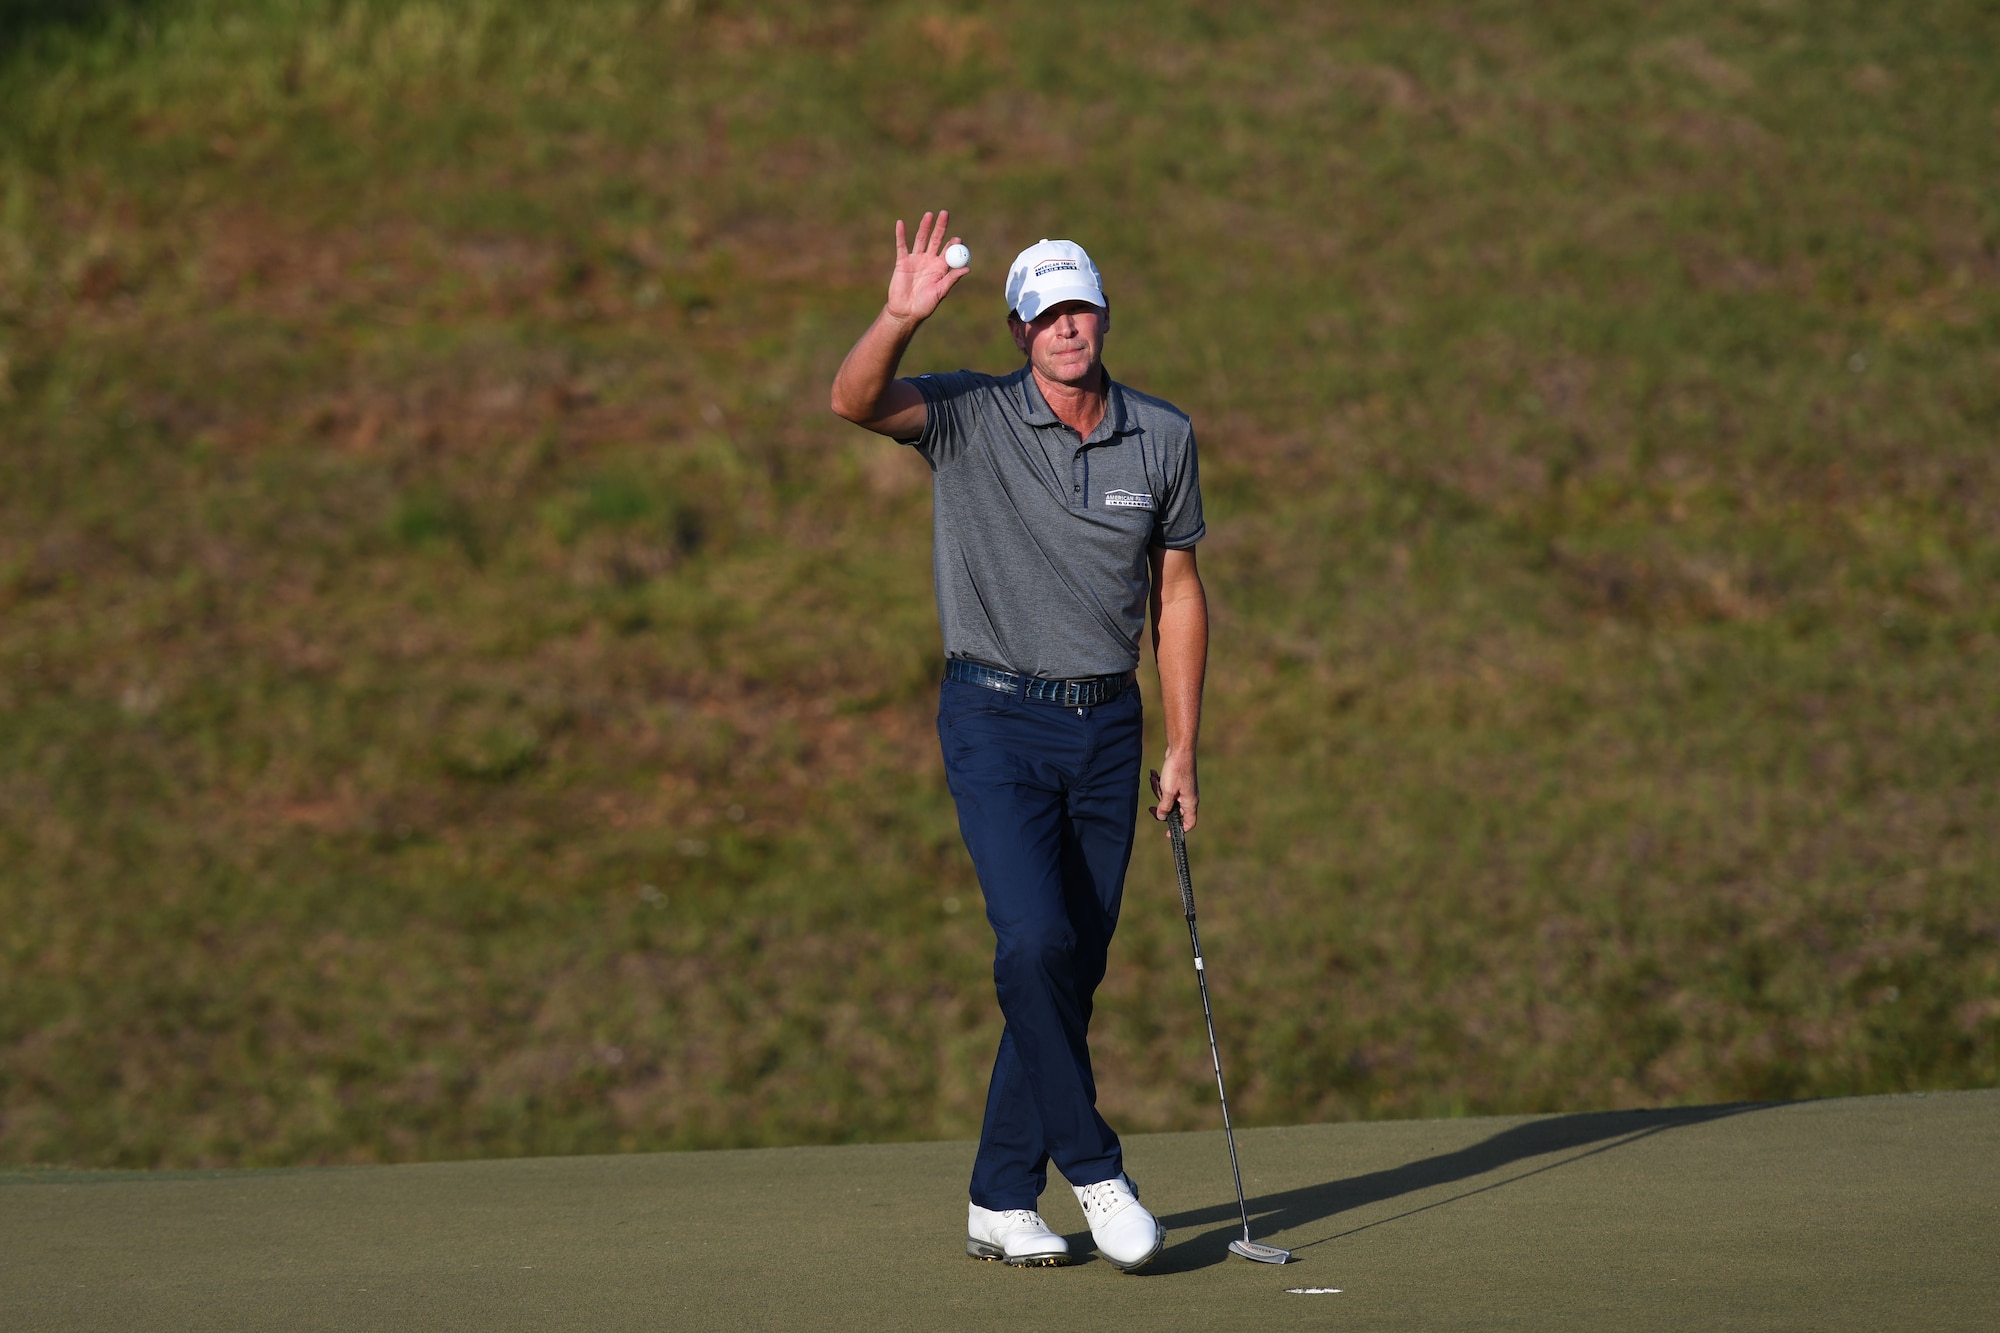 Steve Stricker, Professional Golfers’ Association golfer, waves to the crowd after winning the Rapiscan Systems Classic Champions Tour at Fallen Oak Golf Club March 25, 2018, in Saucier, Mississippi. Keesler personnel performed the national anthem and presented the colors during the closing ceremony of the three-day event. This is the fifth year that the event has been held on the coast. (U.S. Air Force photo by Kemberly Groue)